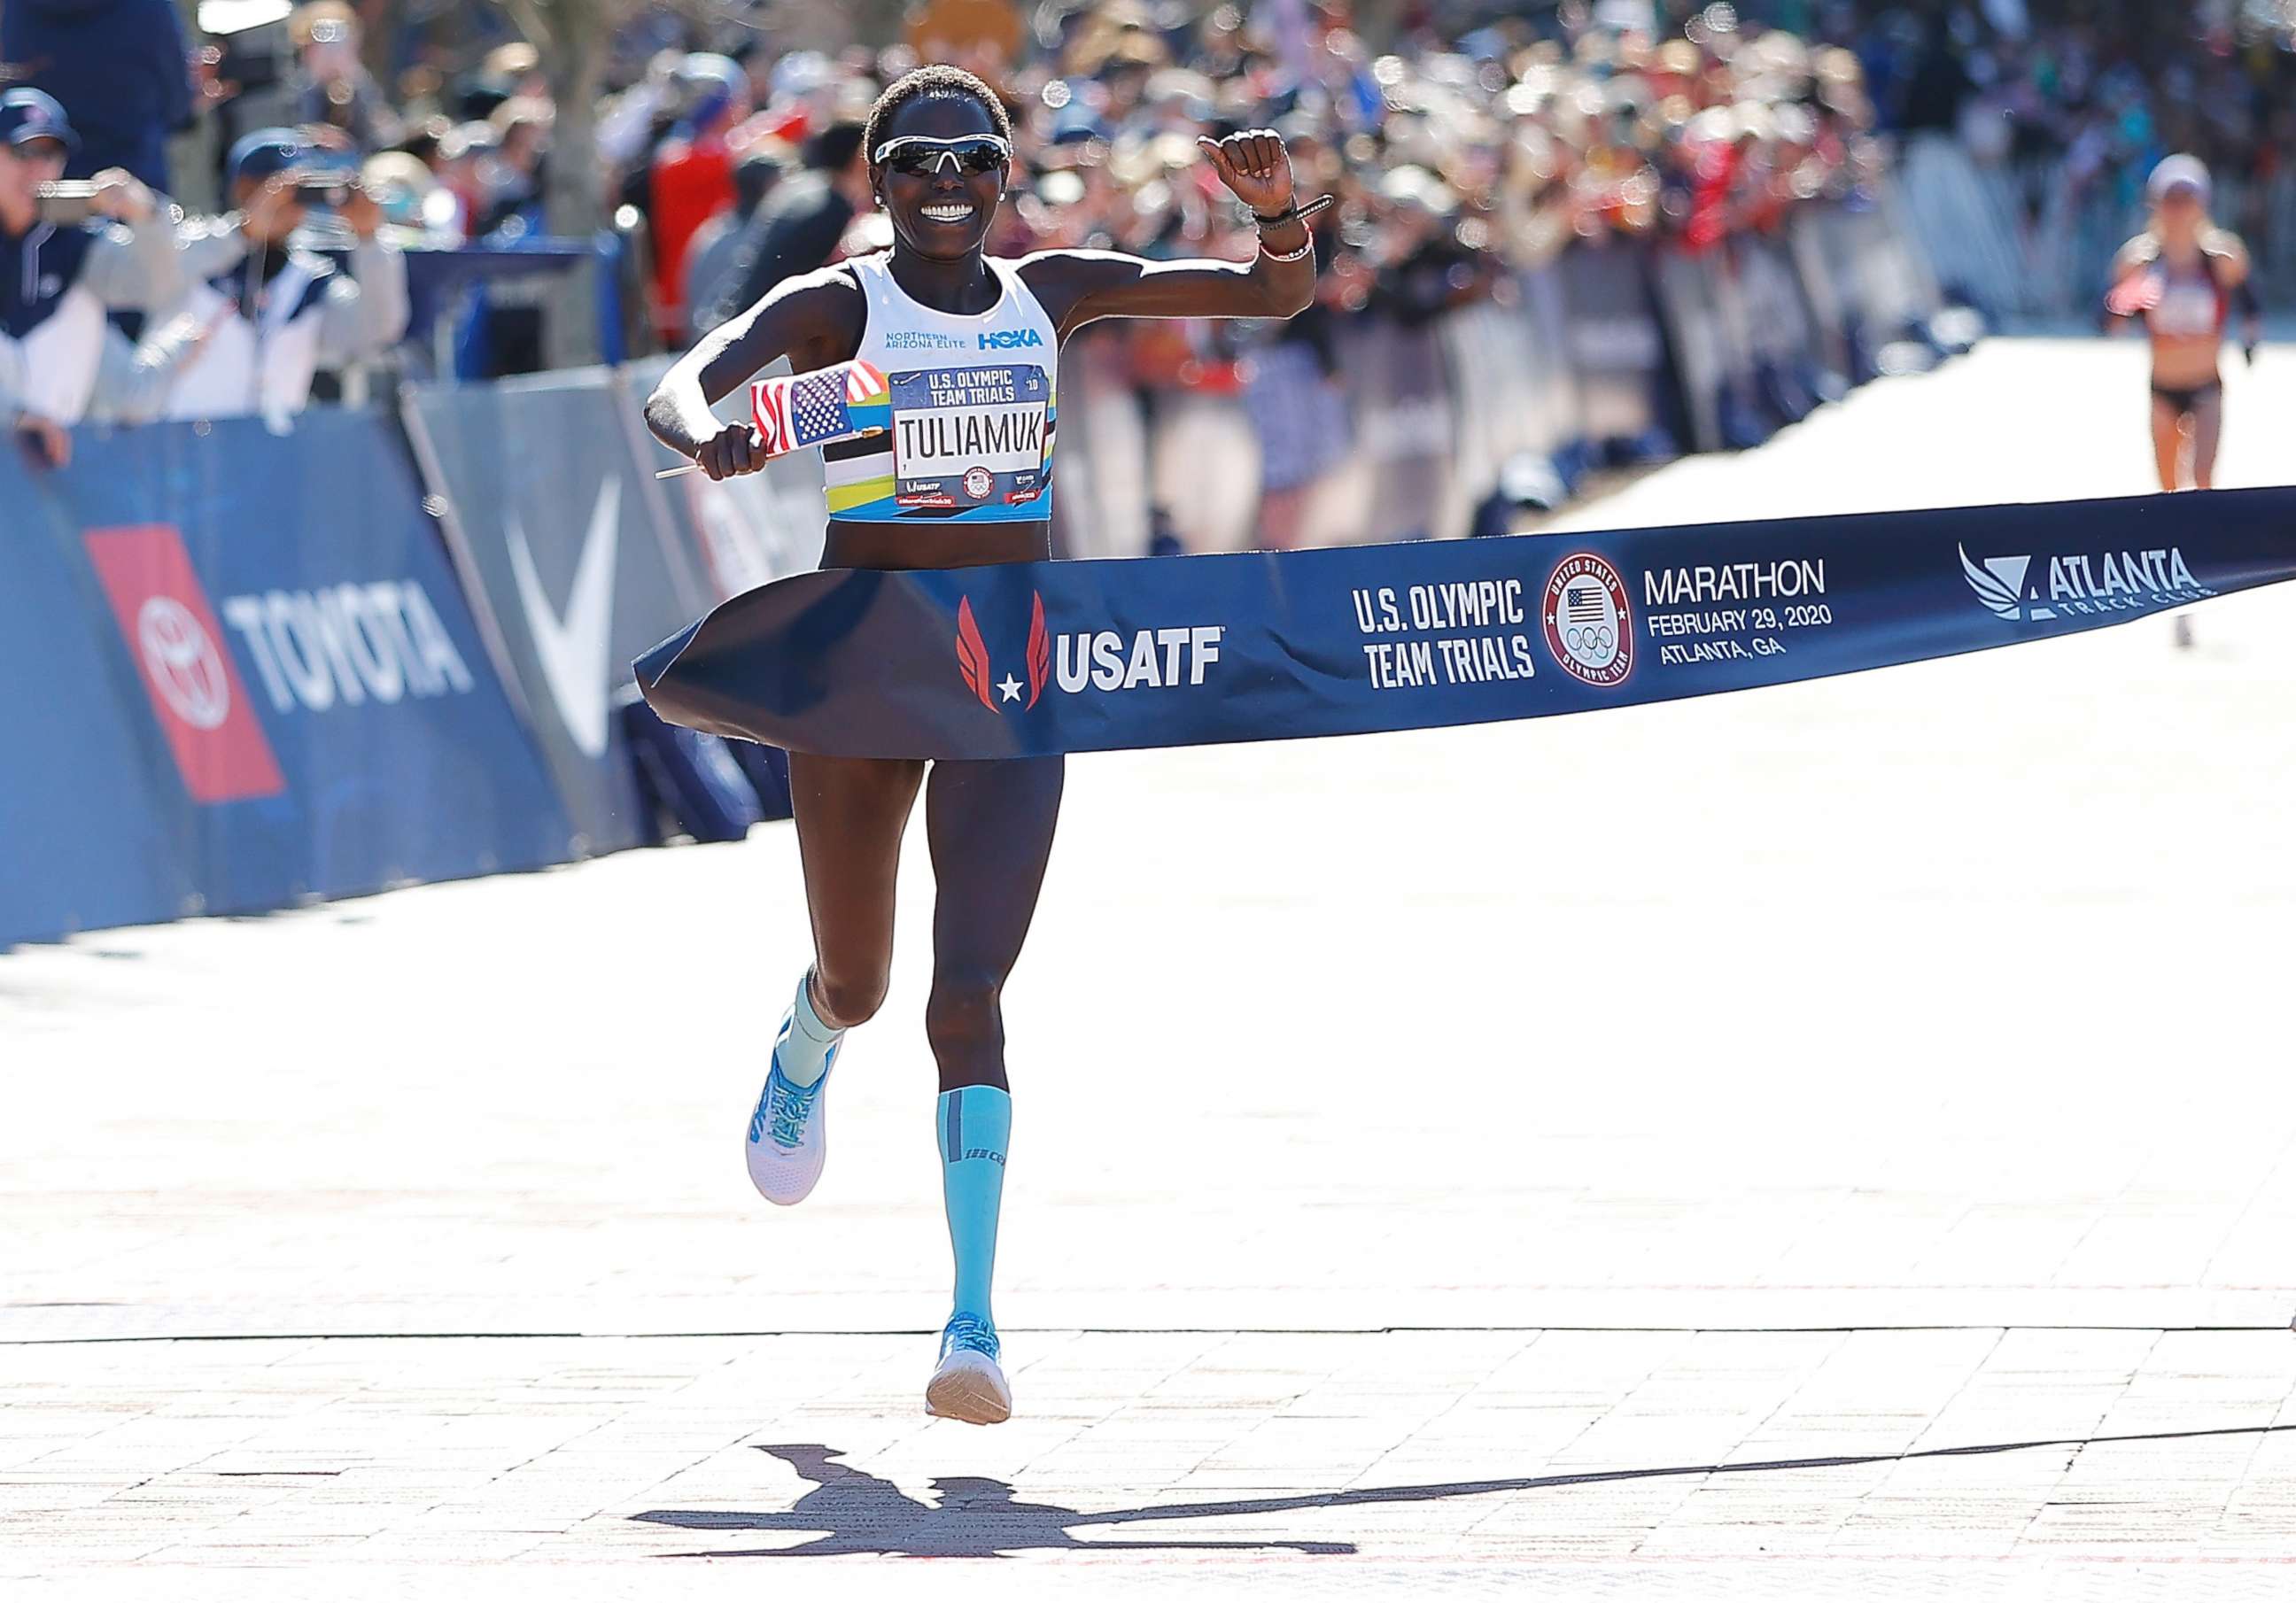 PHOTO: Aliphine Tiliamuk reacts as she crosses the finish line to win the Women's U.S. Olympic marathon team trials on Feb. 29, 2020, in Atlanta.